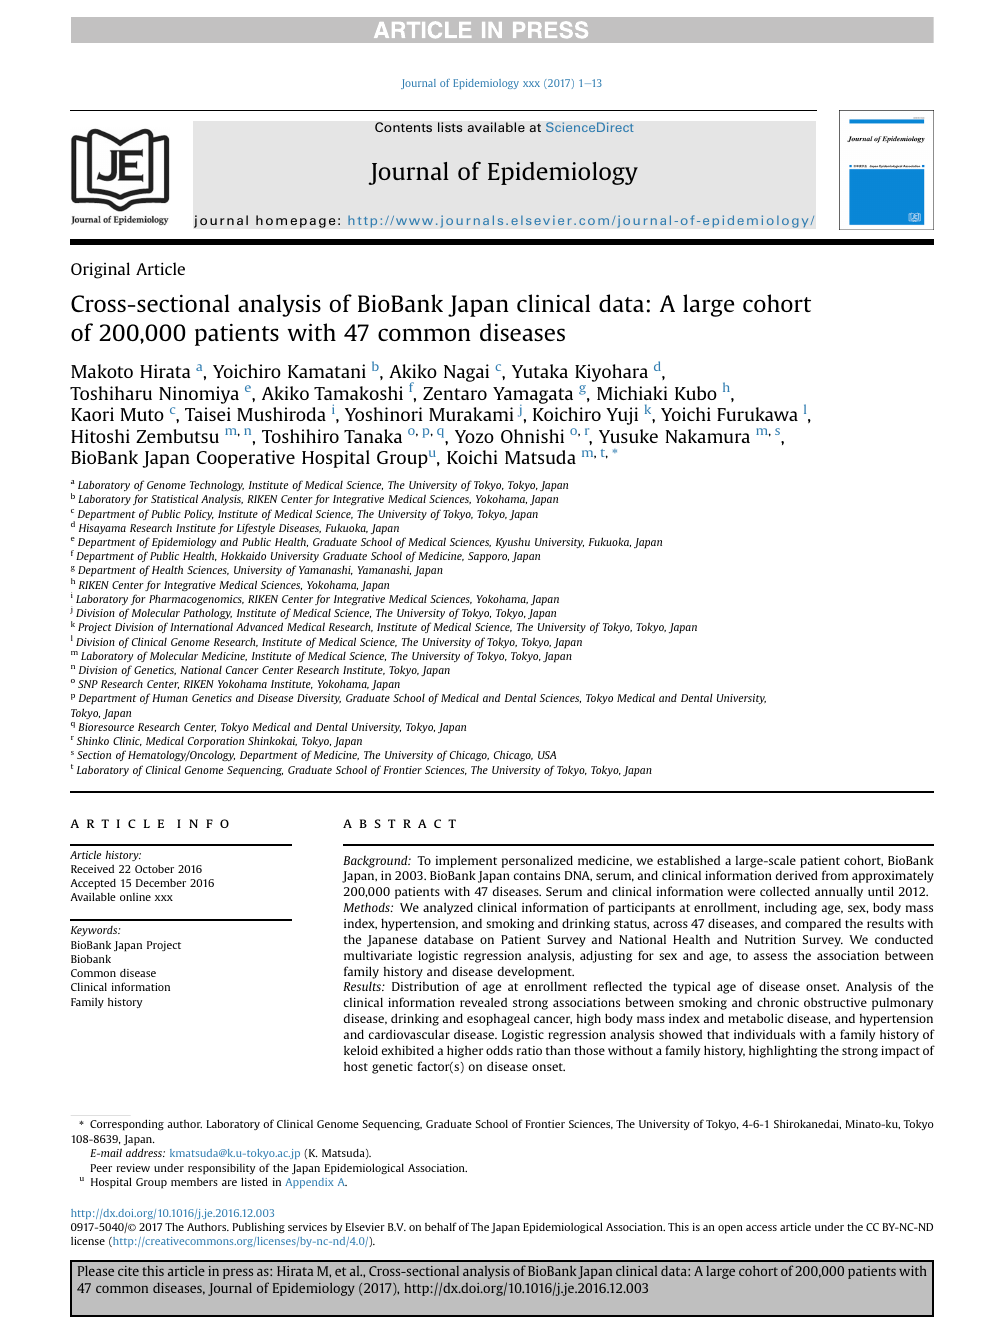 Cross Sectional Analysis Of Biobank Japan Clinical Data A Large Cohort Of 0 000 Patients With 47 Common Diseases Topic Of Research Paper In Clinical Medicine Download Scholarly Article Pdf And Read For